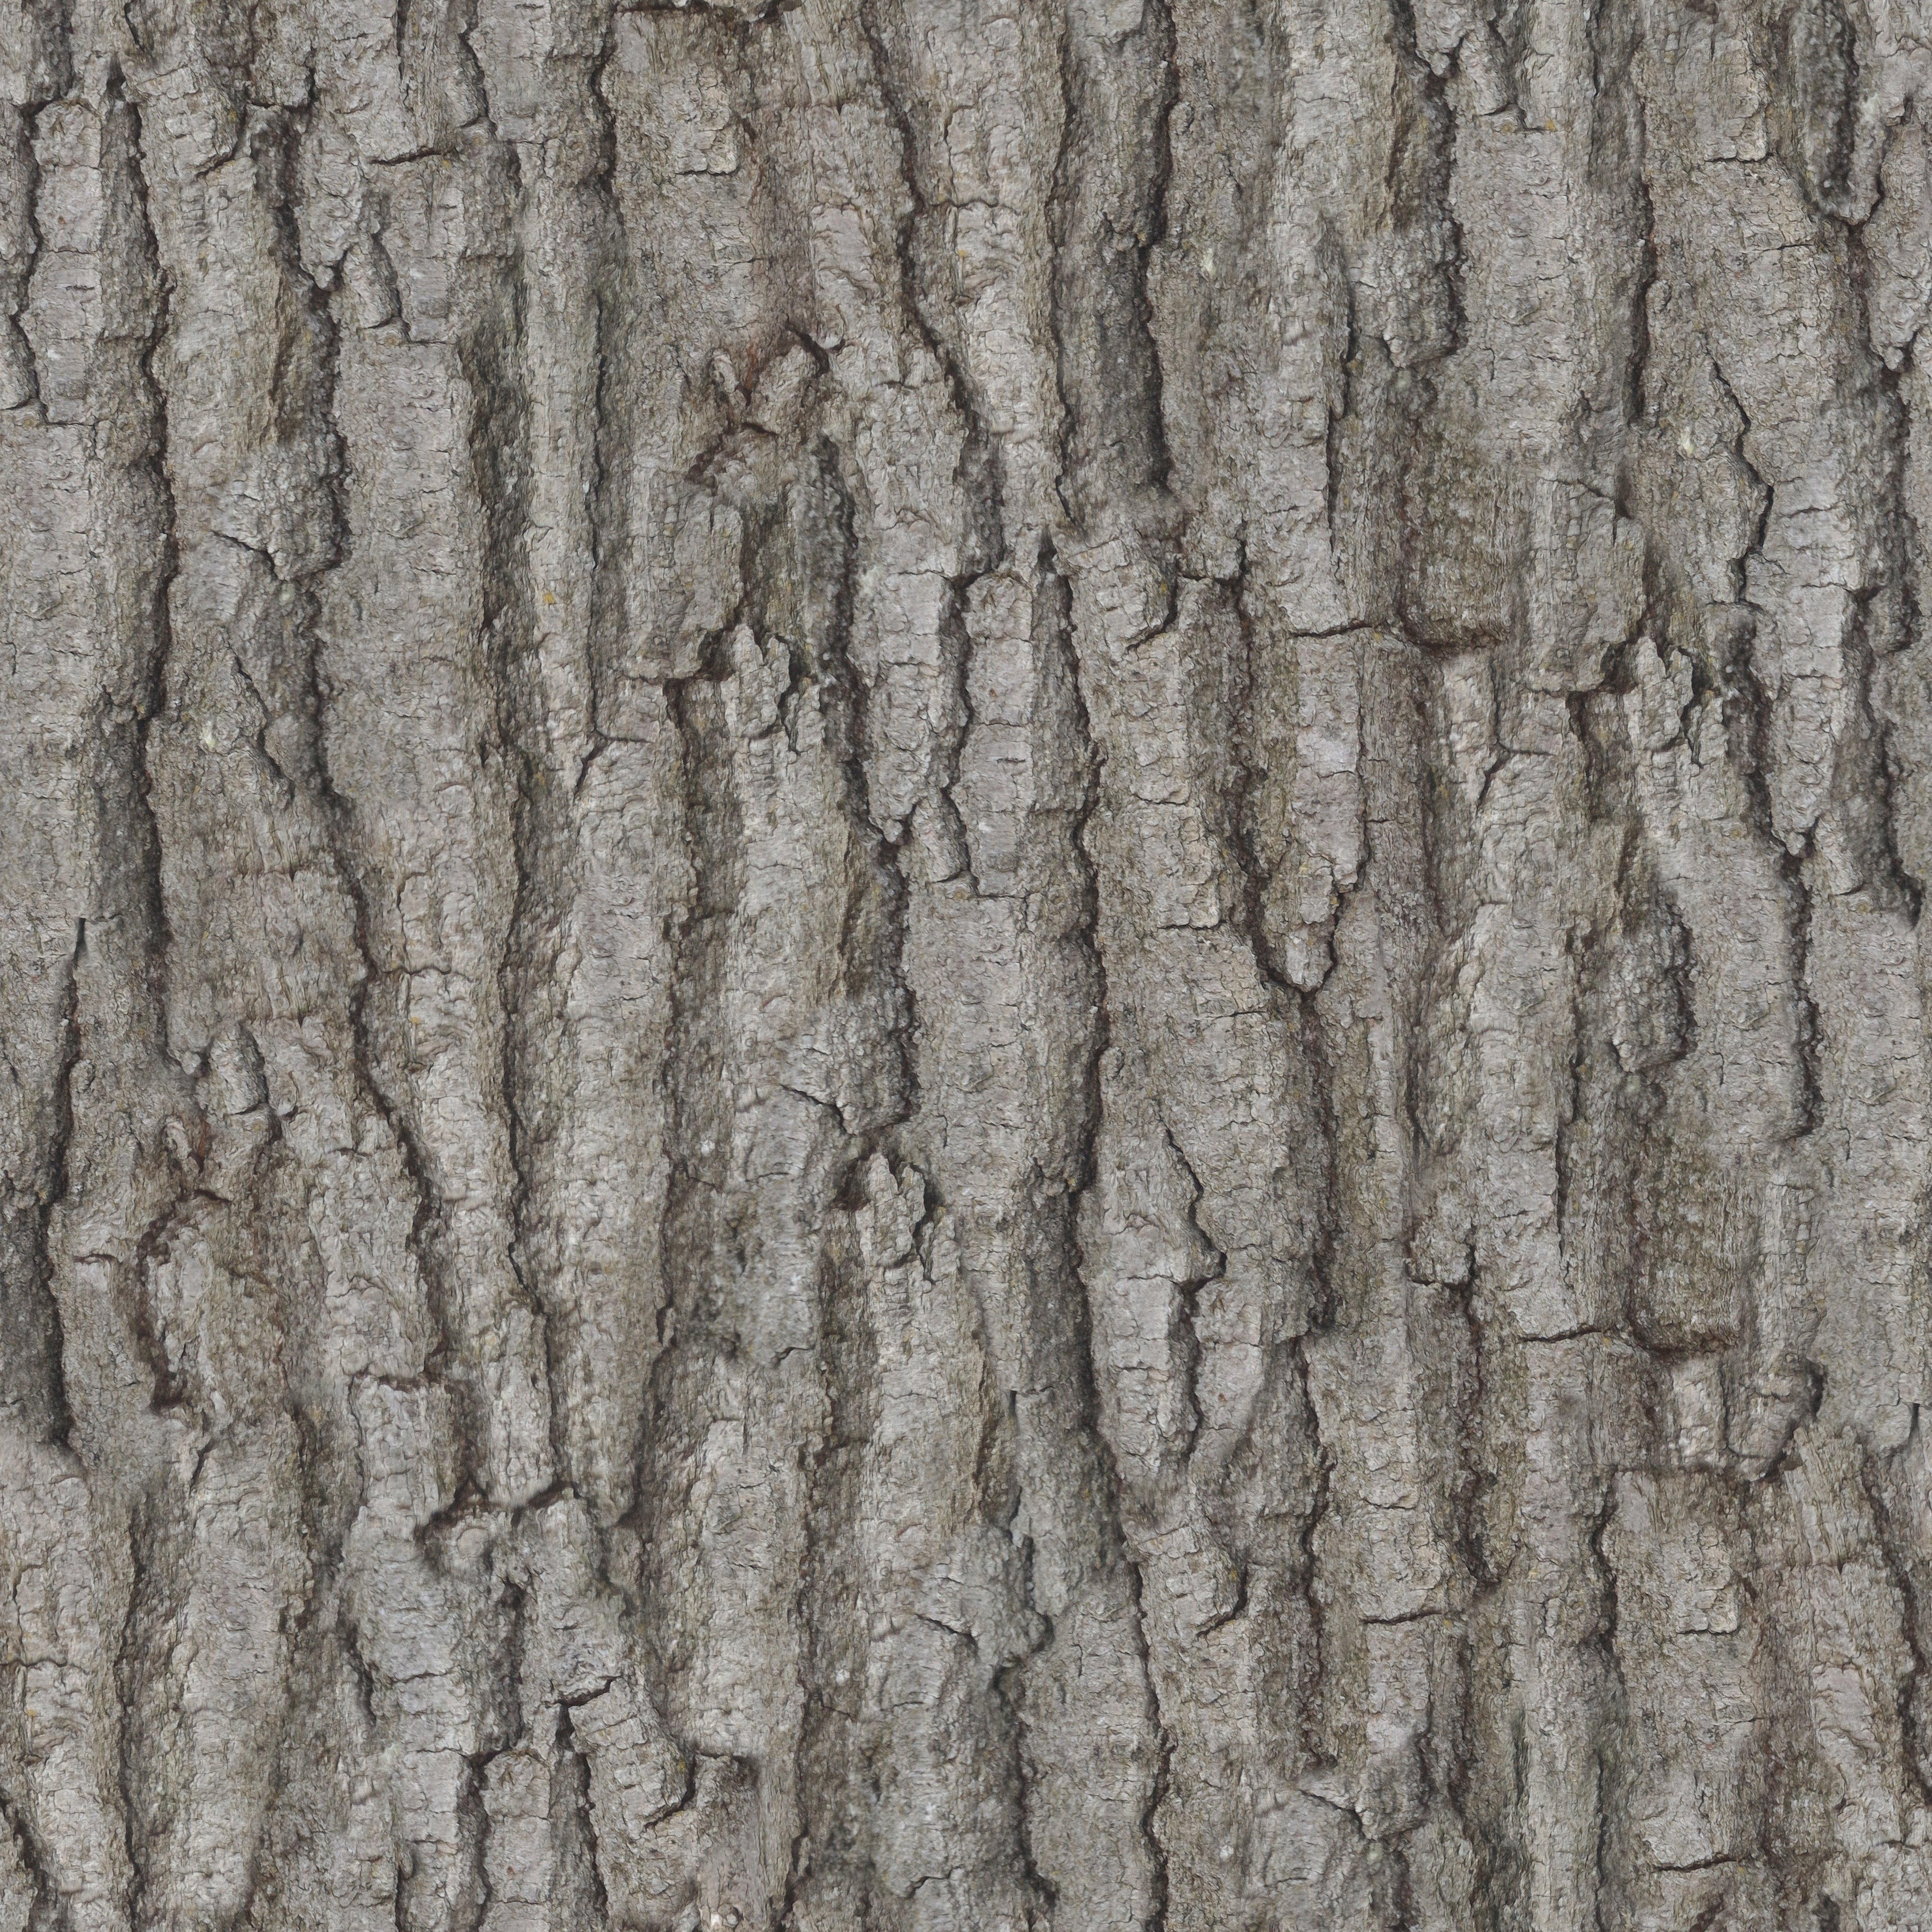 Zero CC tileable bark texture, photographed and made by me. CC0 ...